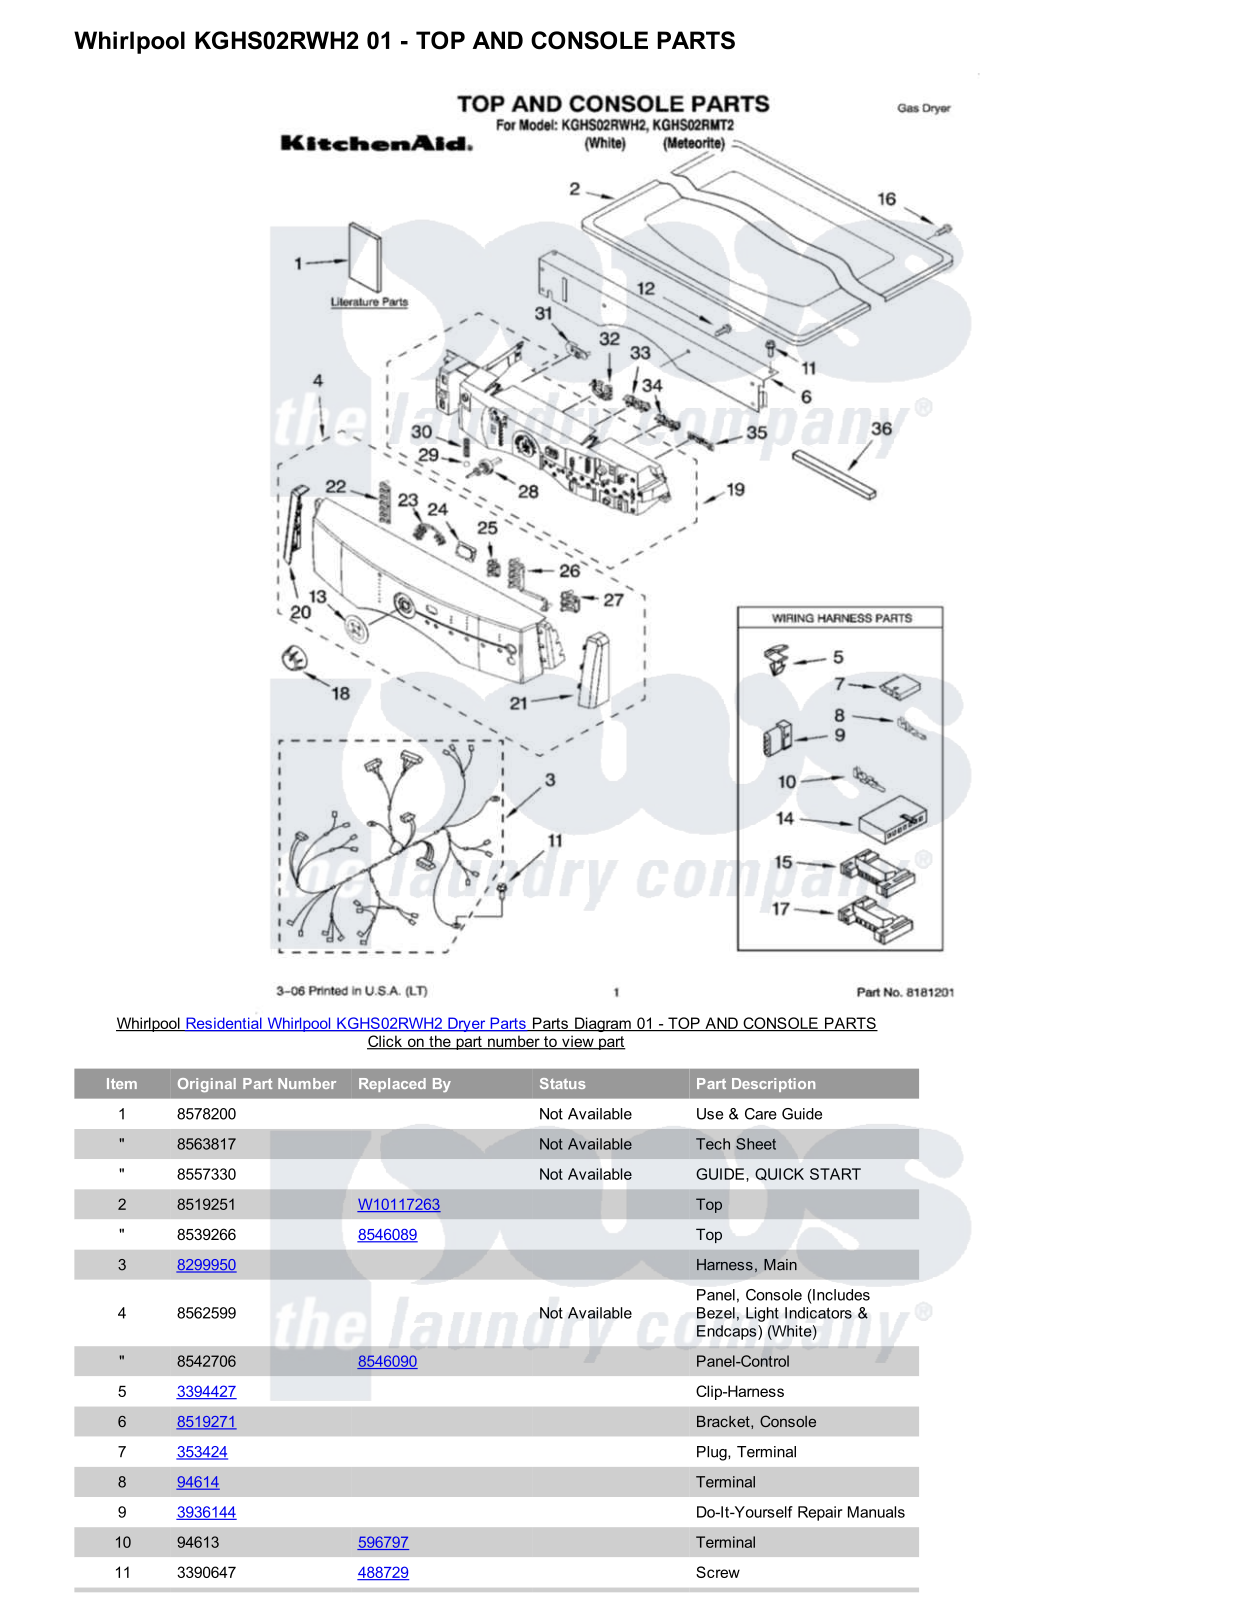 Whirlpool KGHS02RWH2 Parts Diagram